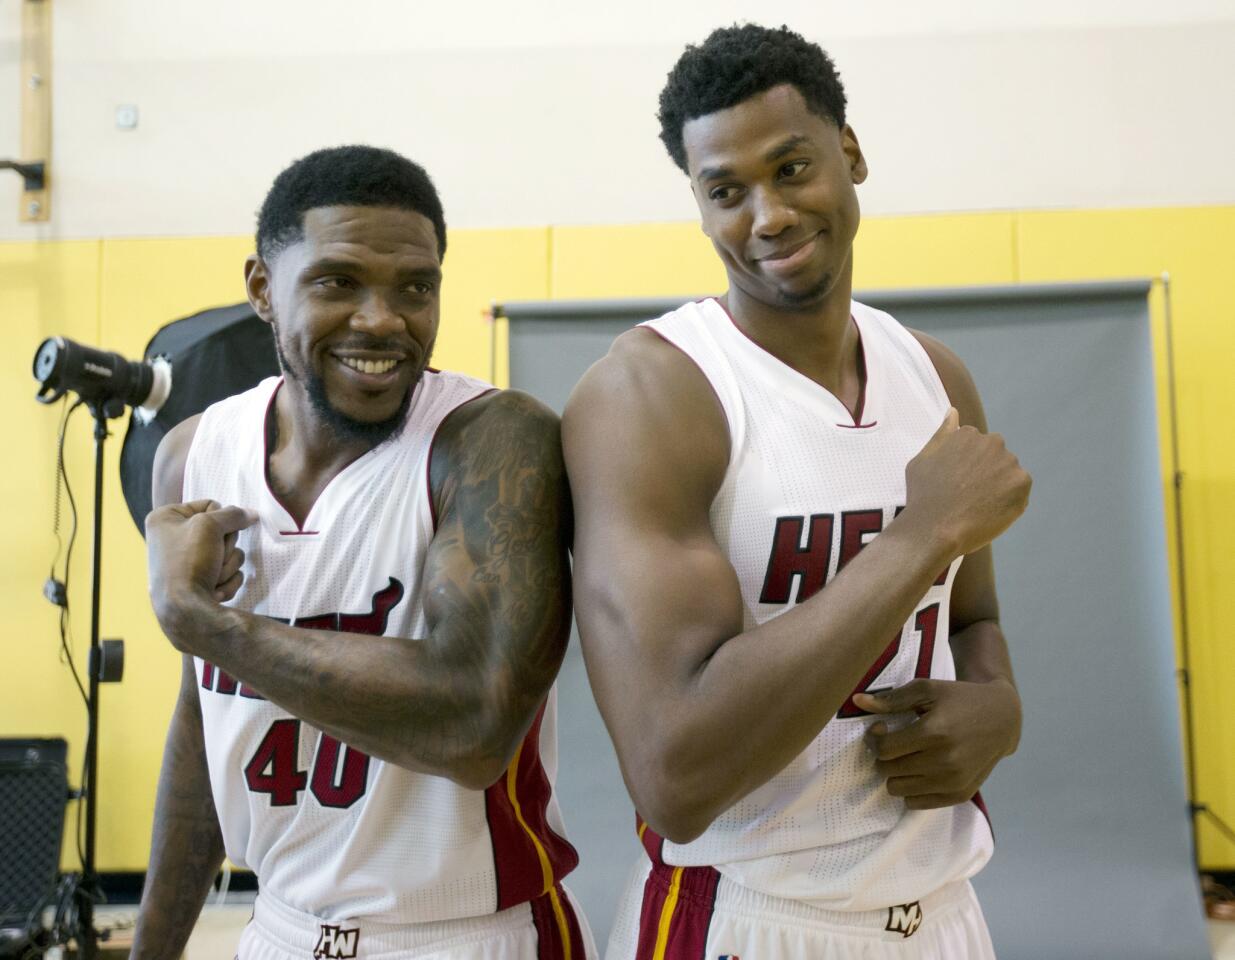 Udonis Haslem of the Miami Heat shows his championship ring during Photo  d'actualité - Getty Images